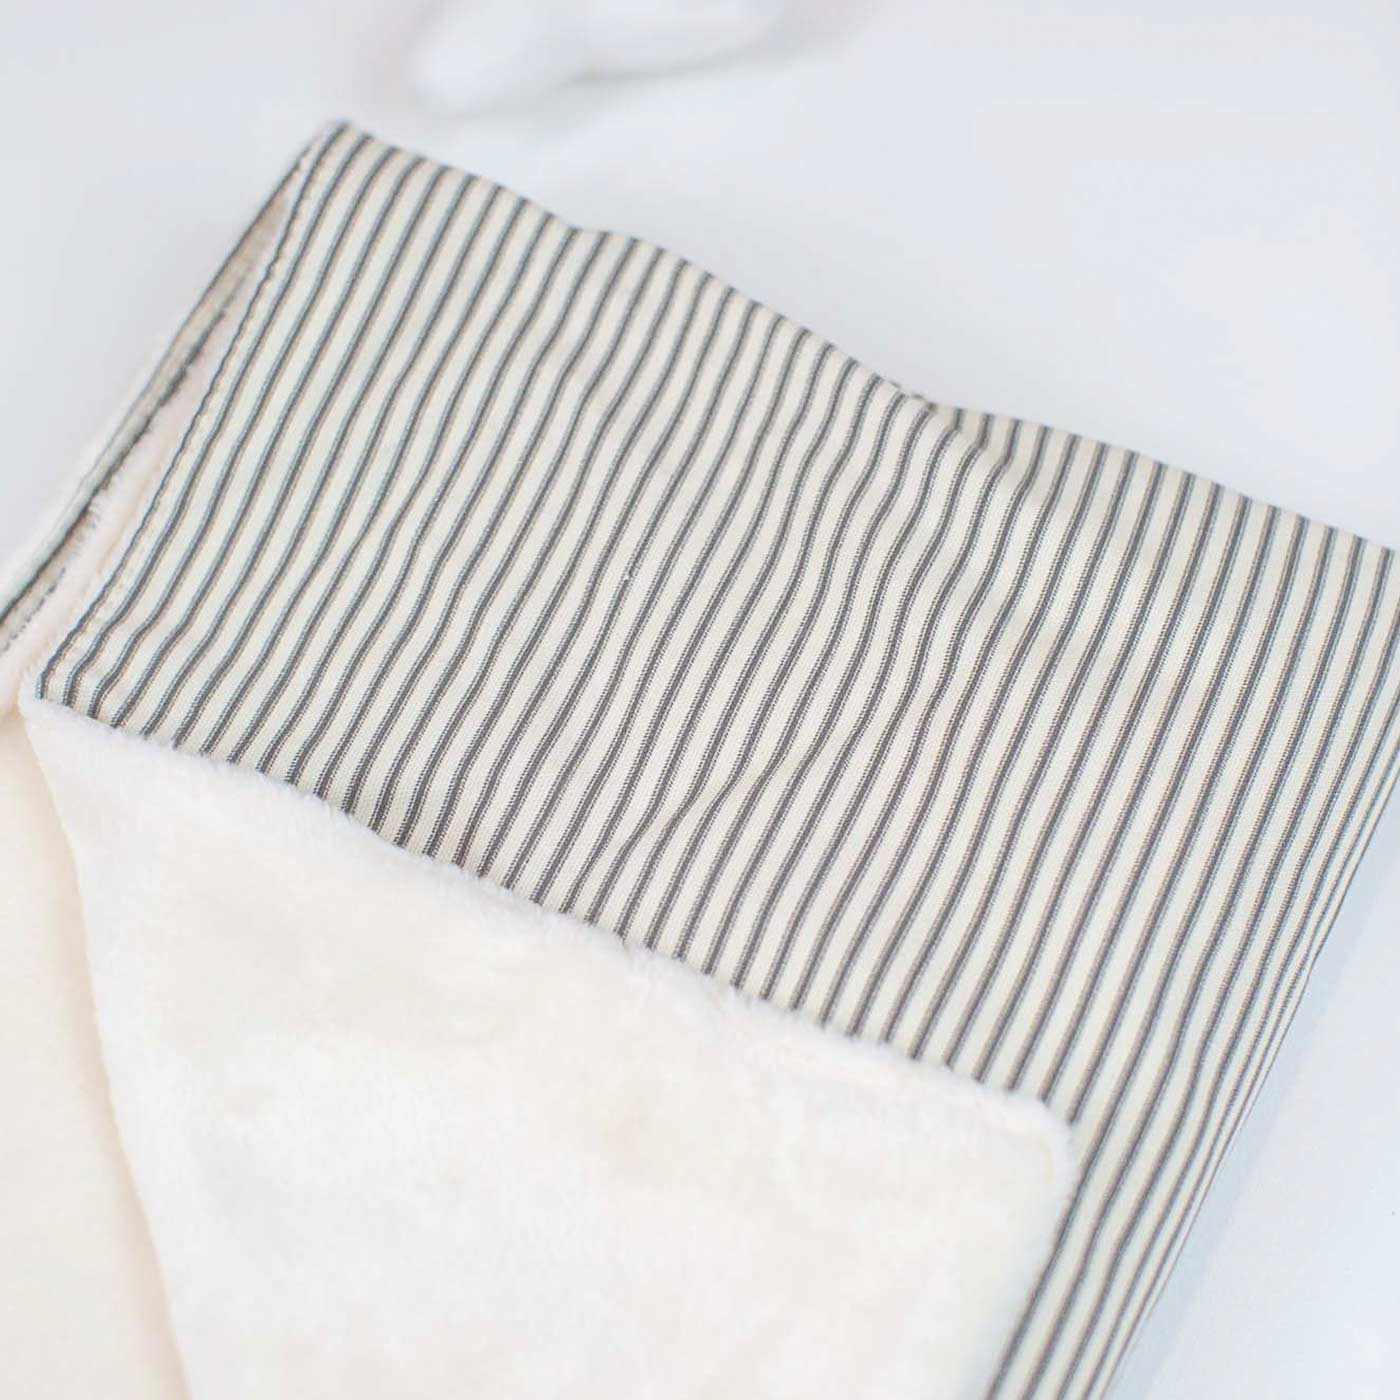 [color:regency stripe] Super Soft Sherpa & Teddy Fleece Lining, Our Luxury Cat & Kitten Blanket In Stunning Regency Stripe I The Perfect Cat Bed Accessory! Available Now at Lords & Labradors US